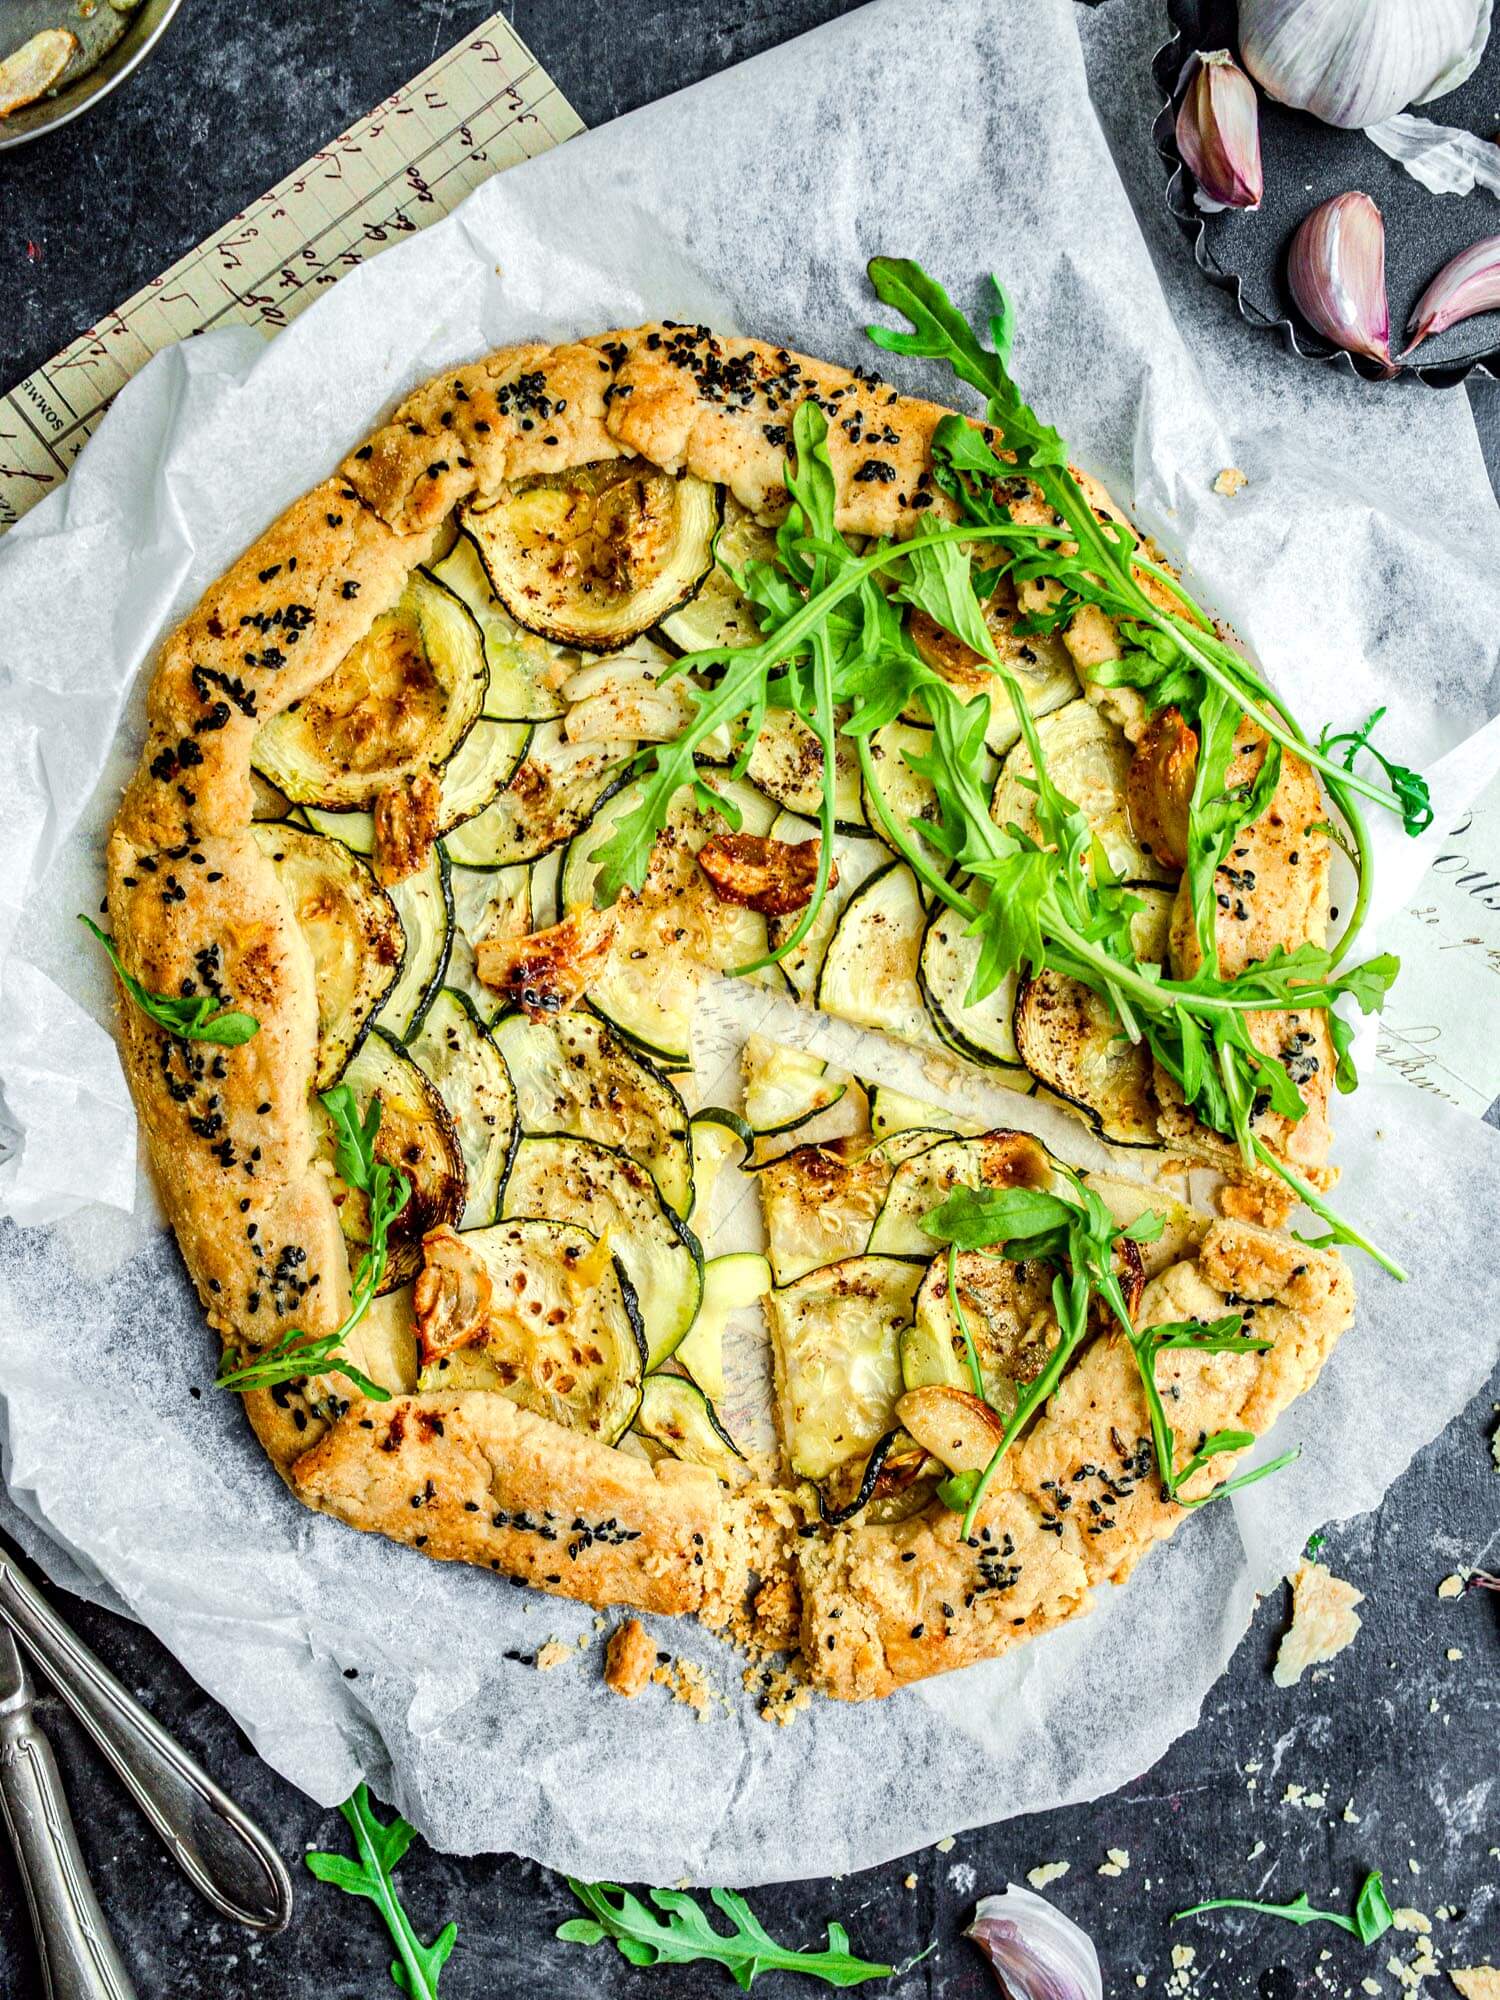 Courgette galette with garlic butter.